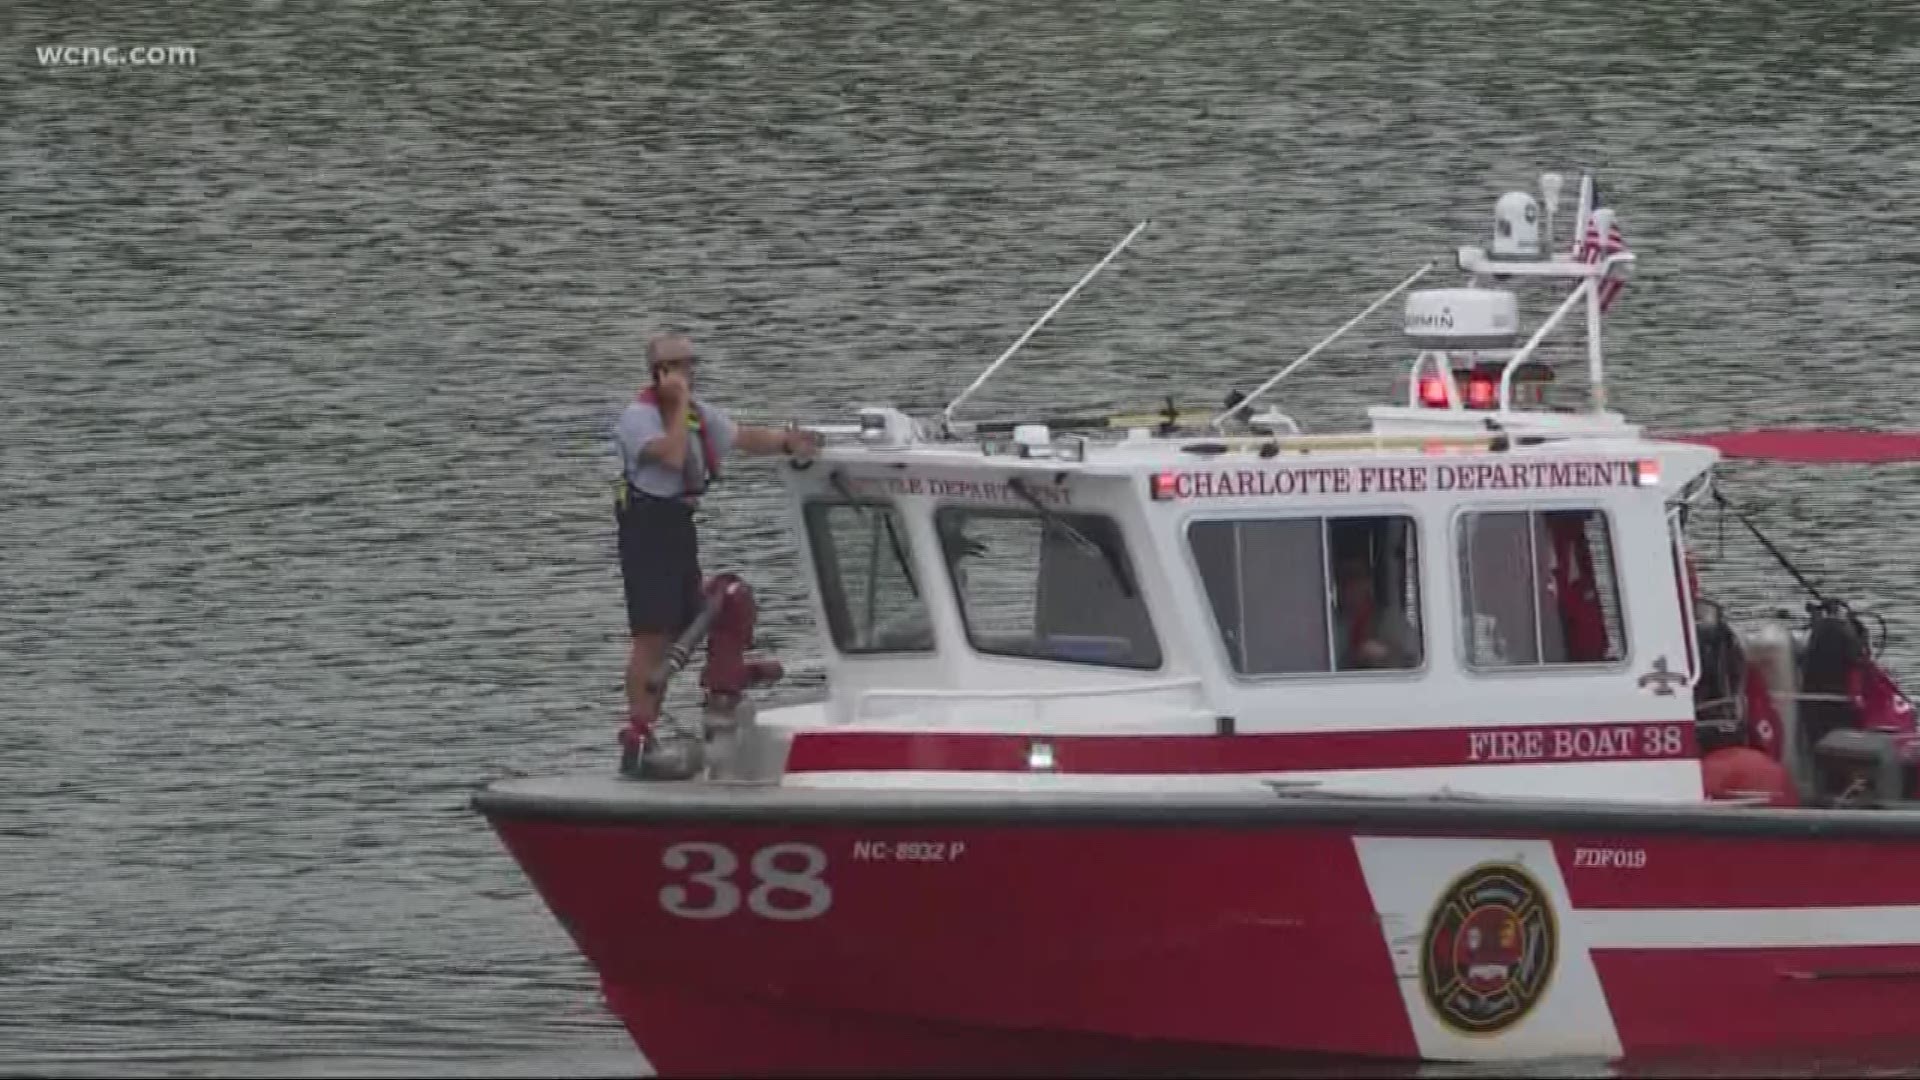 Investigators are trying to figure out how a fisherman drowned in the South Fork Catawba River Wednesday morning.